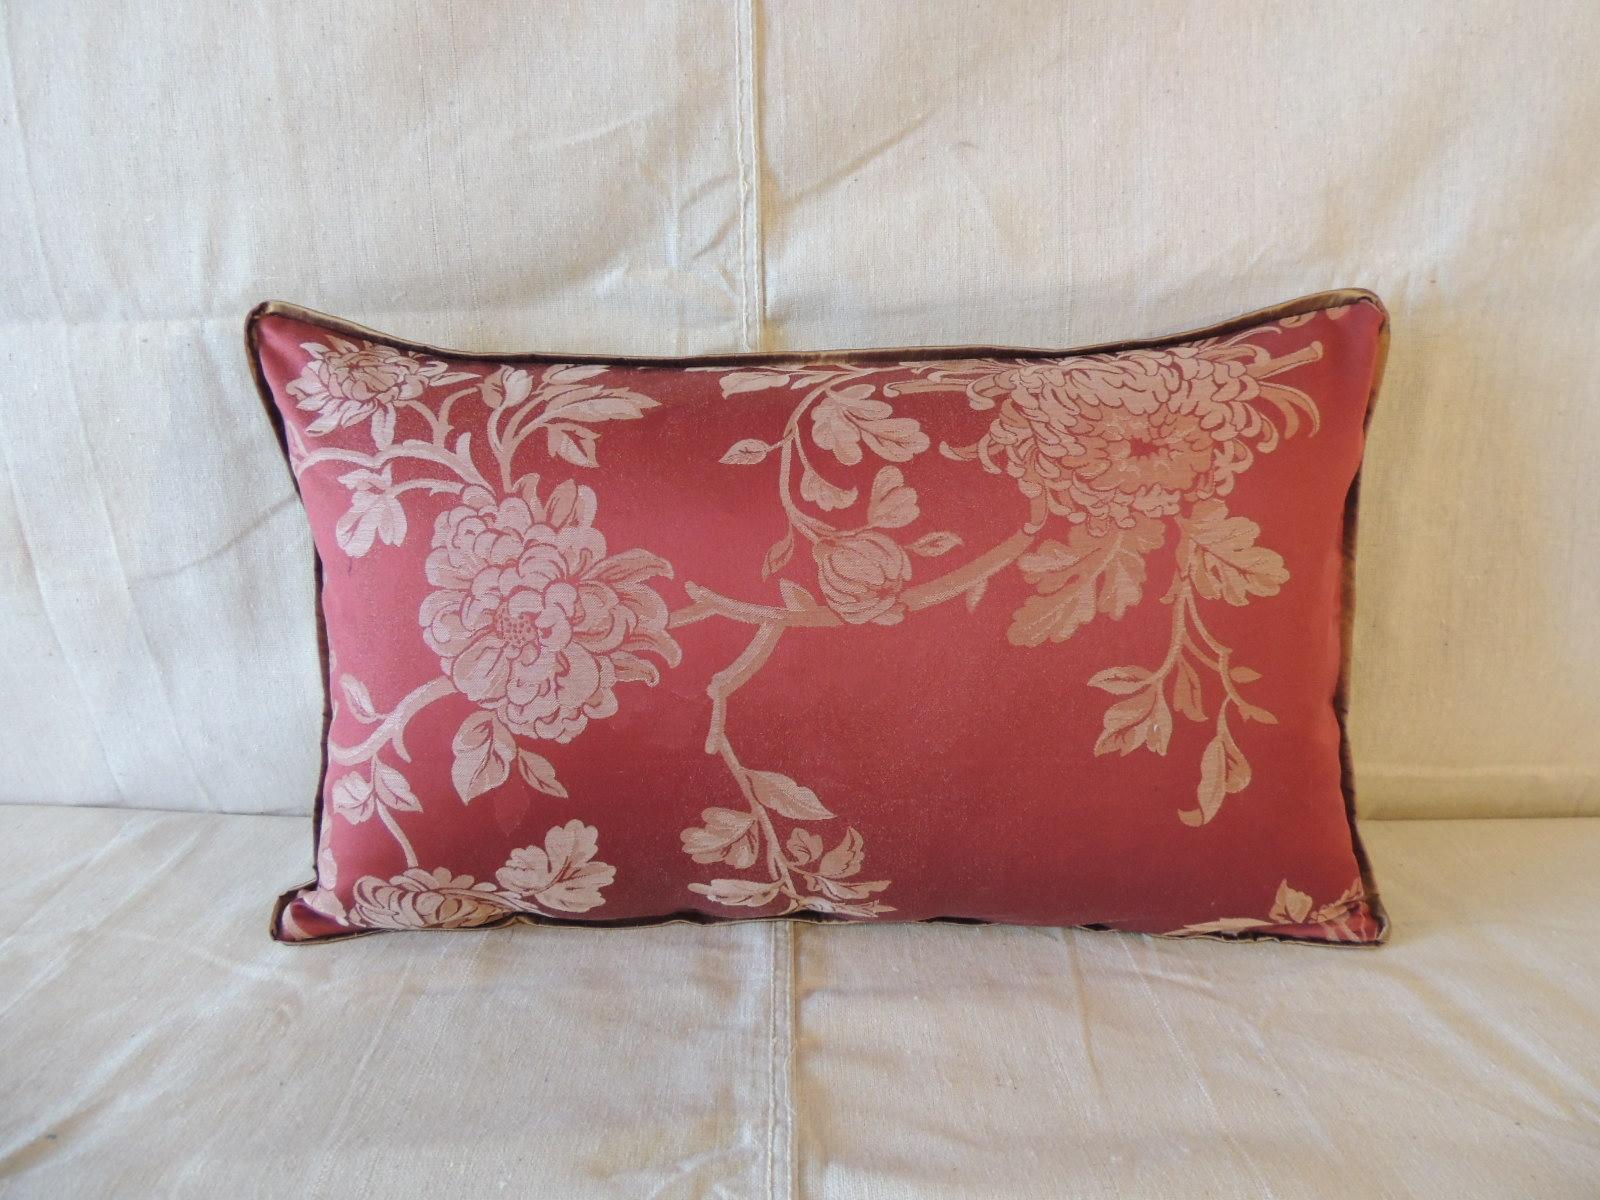 Red satin cotton Floral modern lumbar decorative pillow.
Floral damask style pillow with small ATG custom golden silk trim,
same silk on backing.
Decorative pillow handcrafted in Portugal.
Stitched by hand closure with custom-made pillow